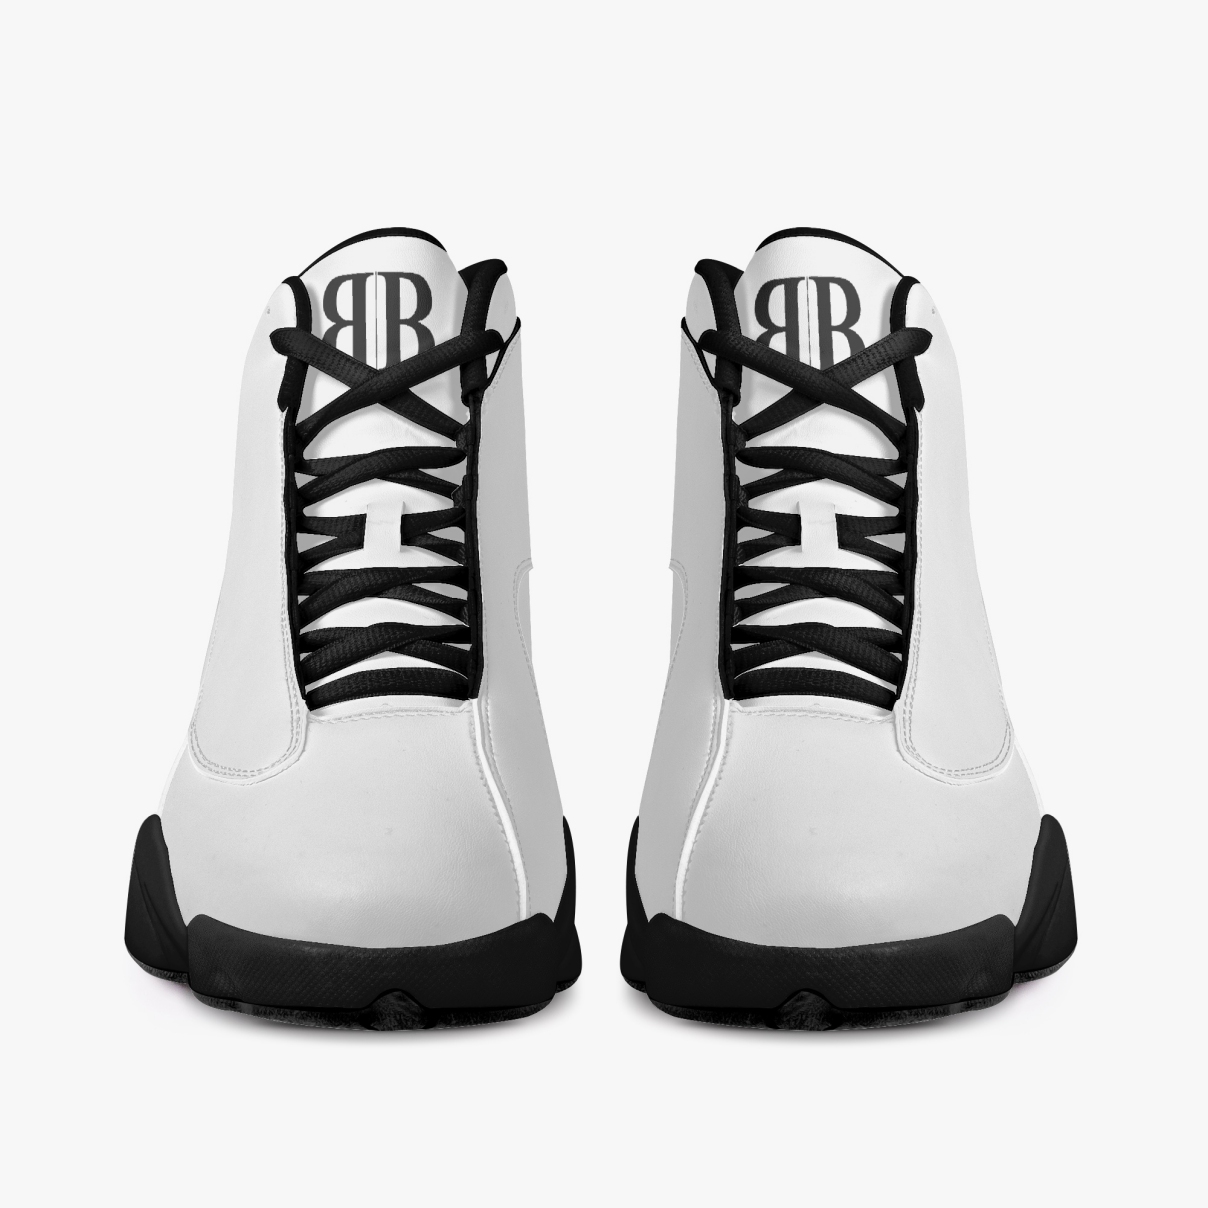 Blk Sole High Top Leather Bsktball Sneakers 2